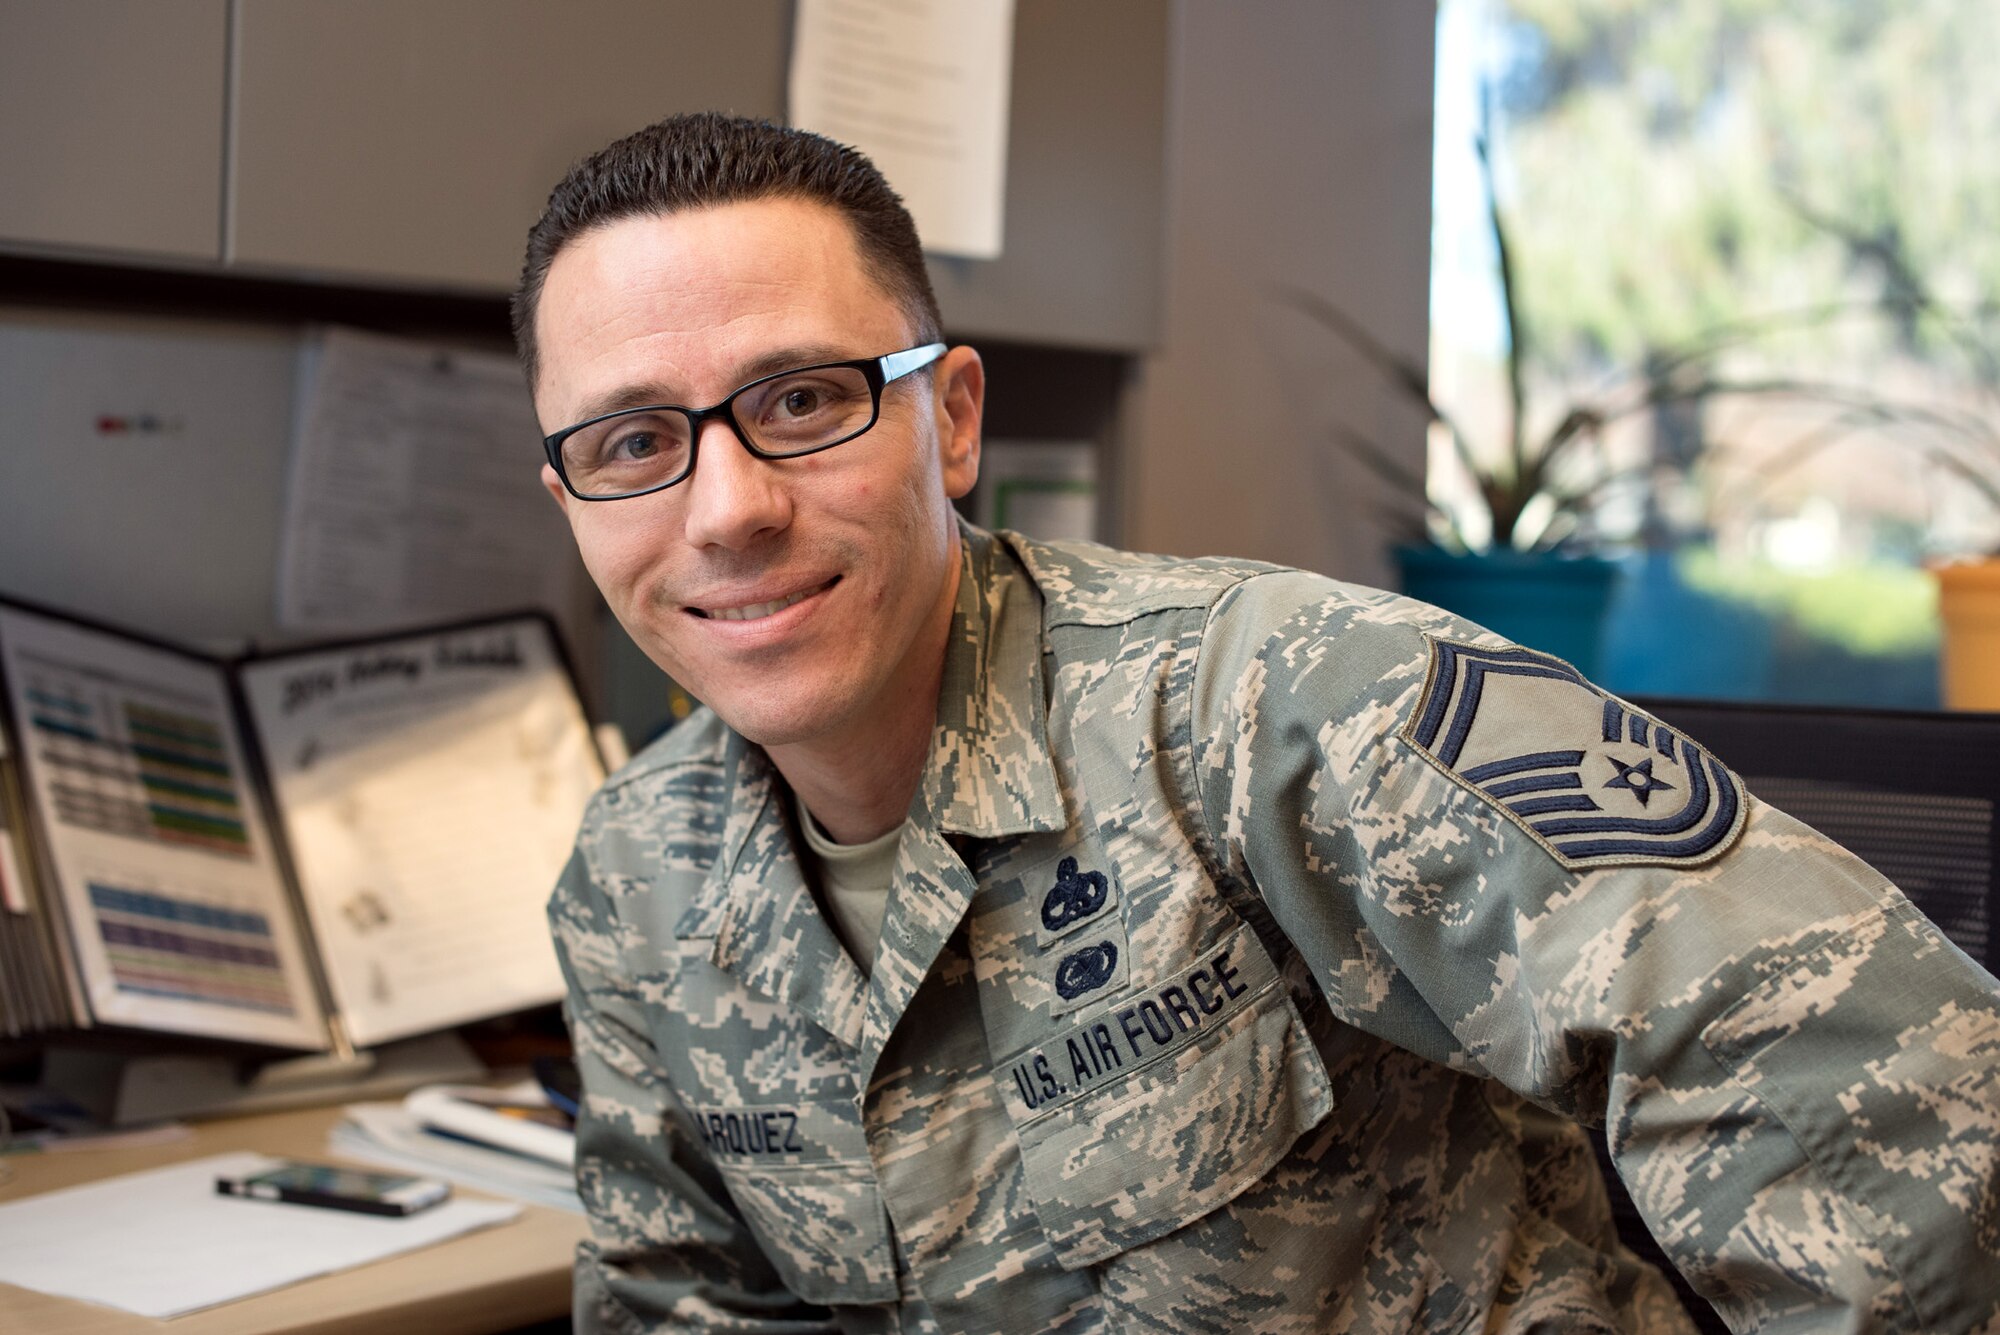 Senior Master Sgt. Anthony Marquez., 749th Aircraft Maintenance Squadron. "Receiving honest feedback from section supervisors and being part of their growth has meant a lot to me, and has helped me assess my own communication skills." (U.S. Air Force photo by Ken Wright)